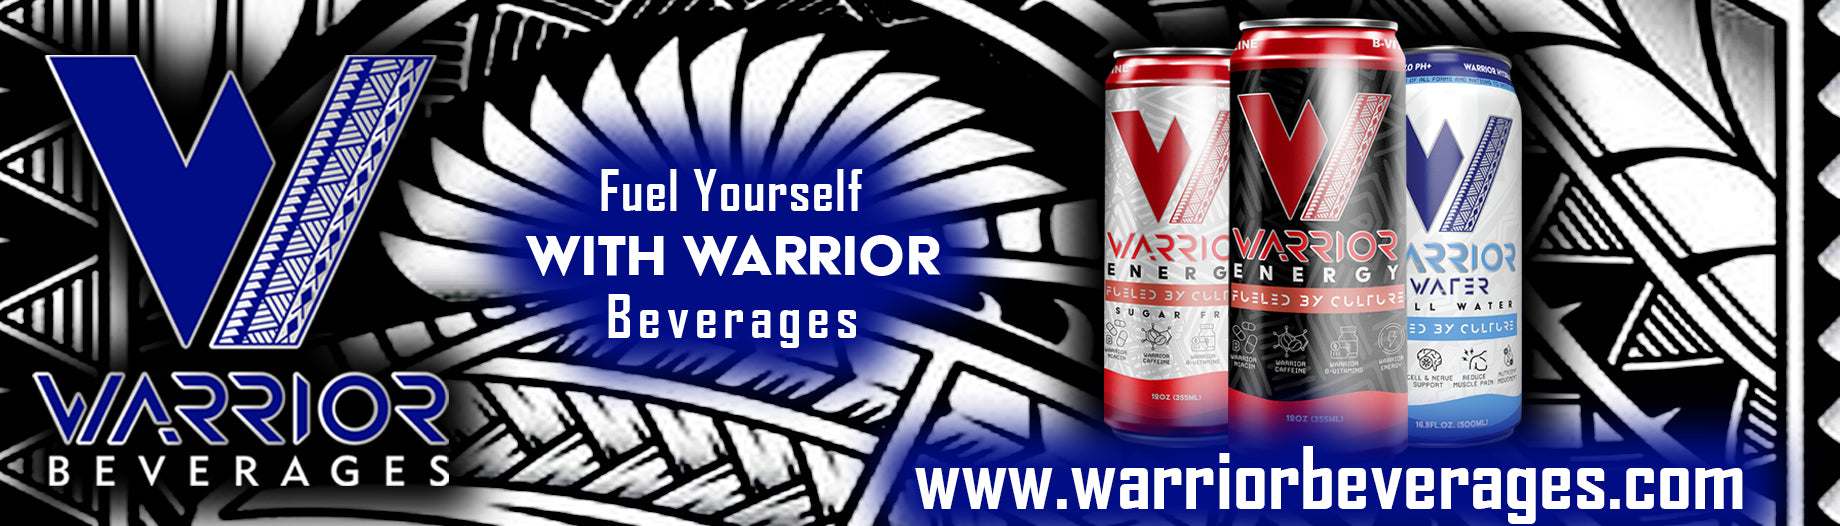 Refresh Your Body and Mind with Healthy Water and Best Energy Drinks - Warrior Beverages